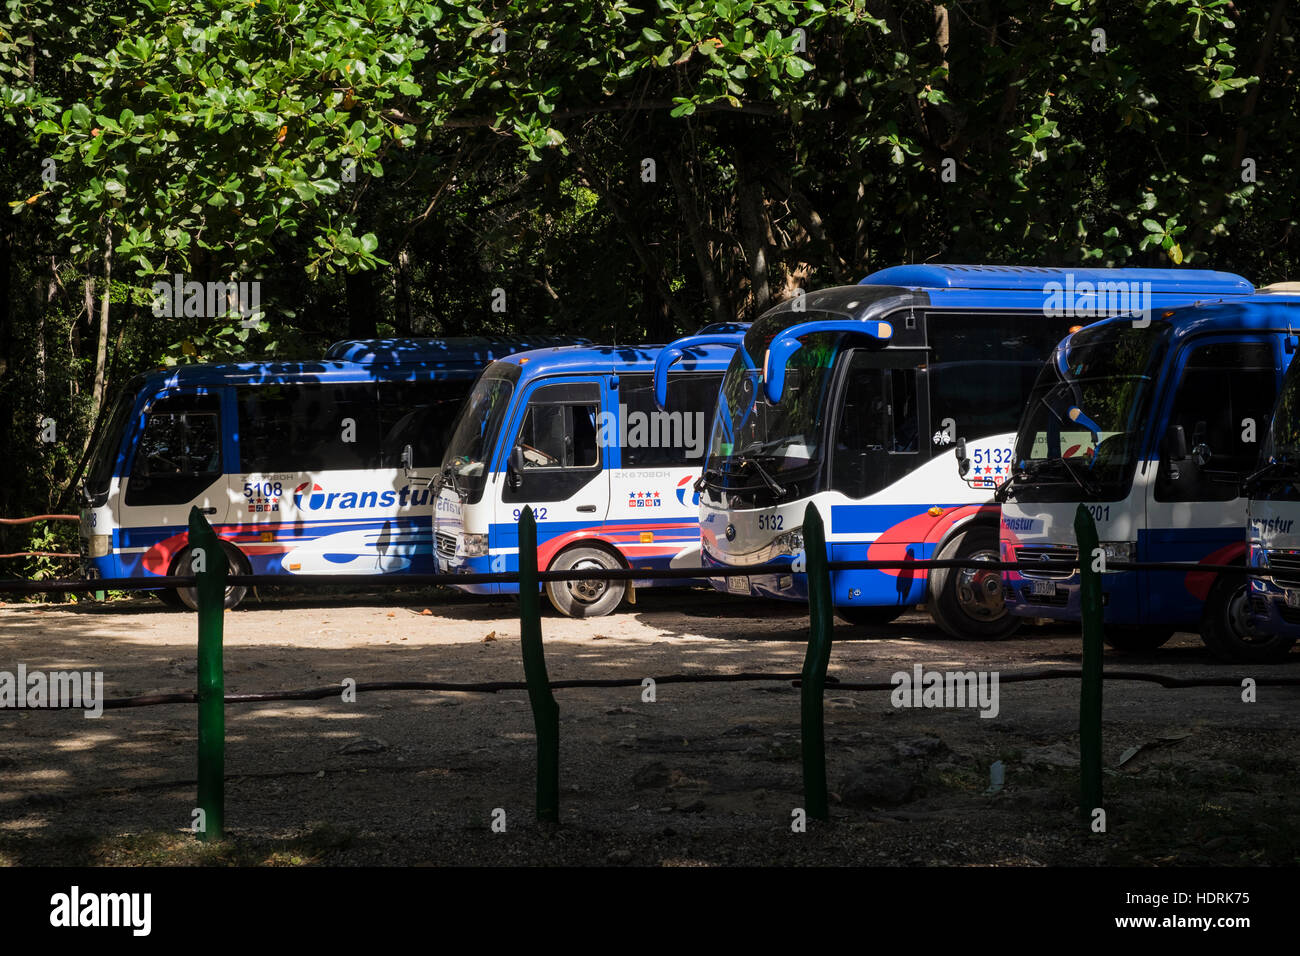 Transtour Cuban government owned company tourist coaches parked in a car park, Trinidad, Cuba Stock Photo